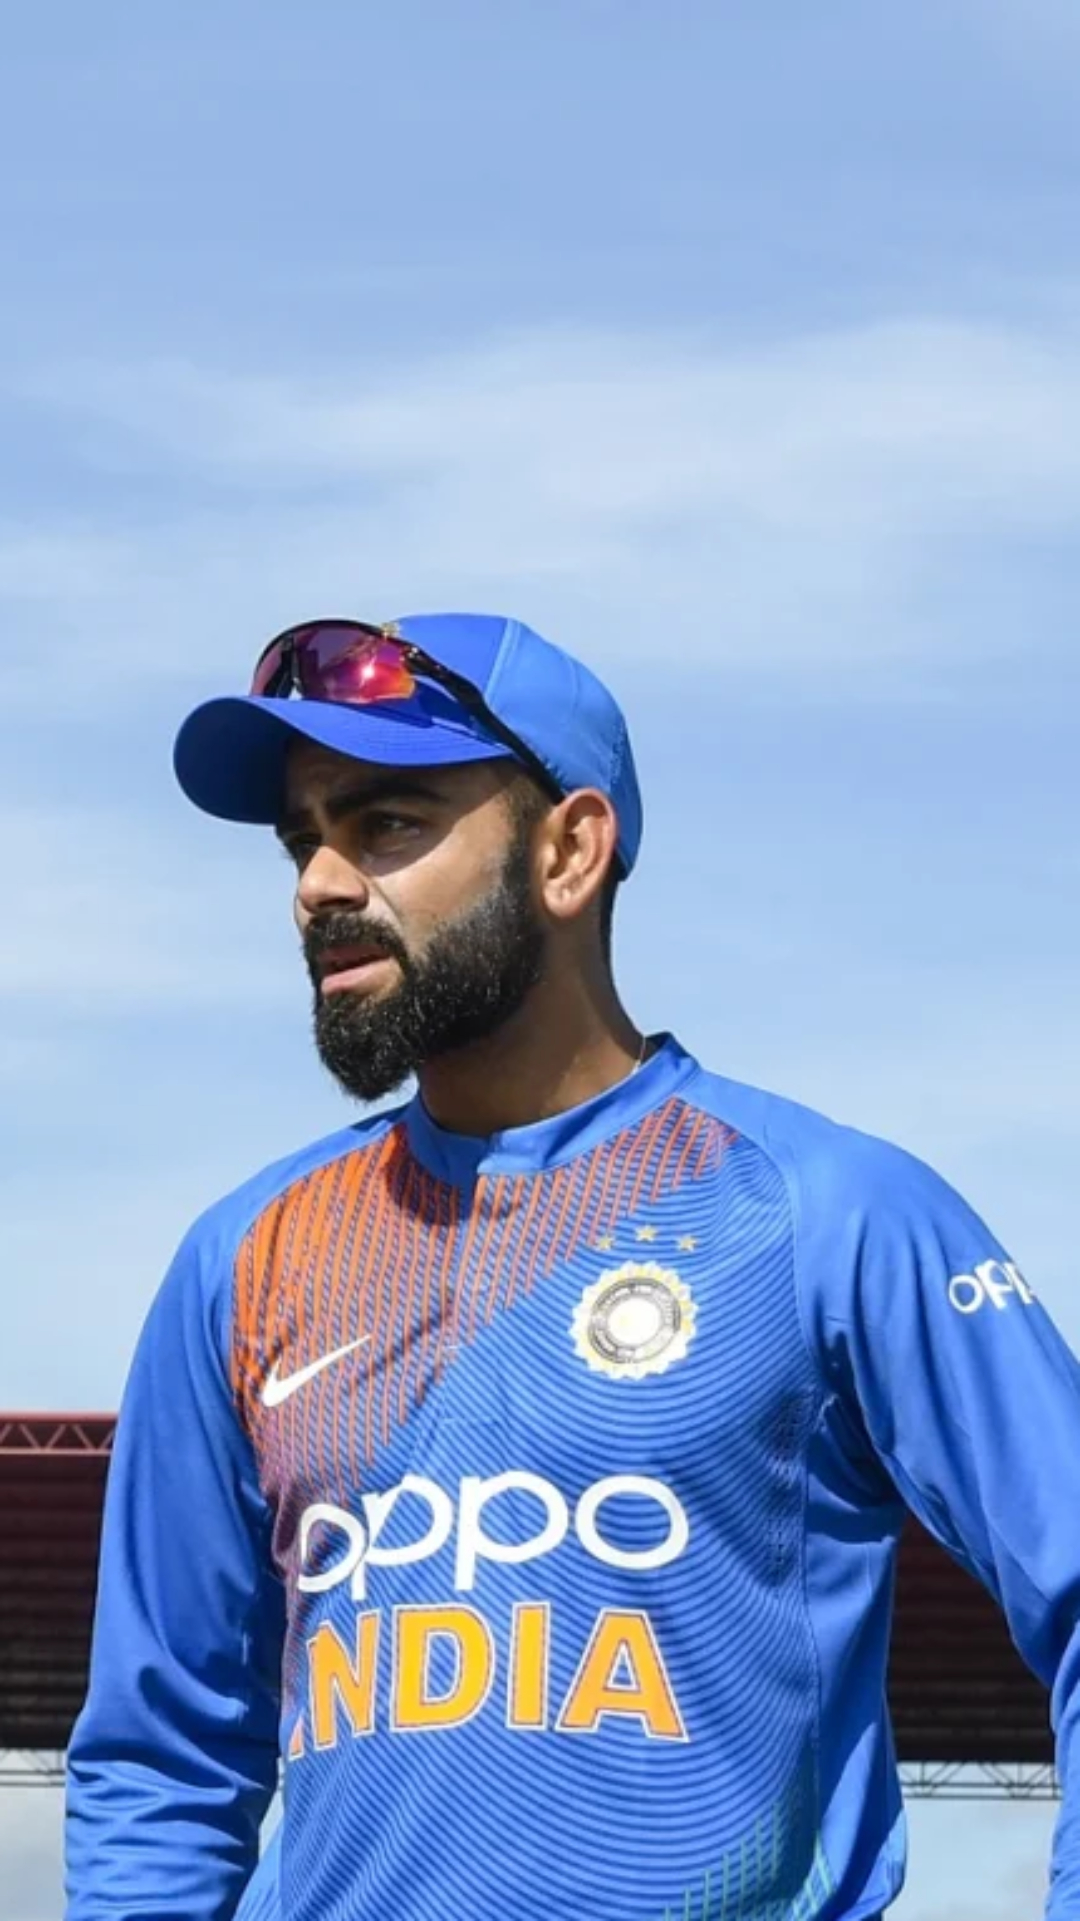 T20 World Cup: Virat Kohli to Misbah-ul-Haq, here's players who have hit most 6s in final of tournament